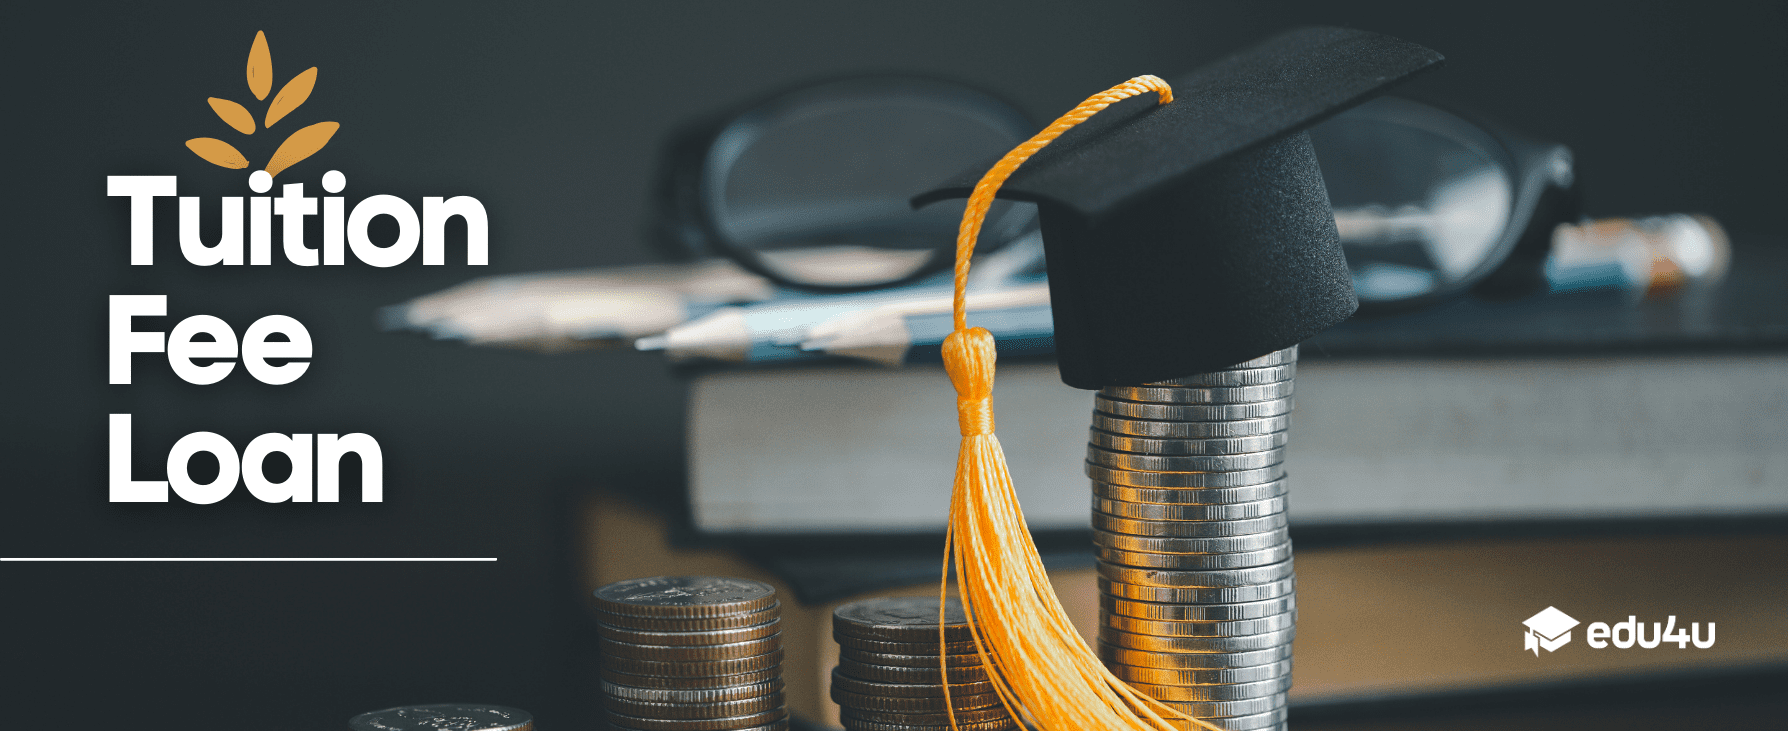 Tuition fee loan in England